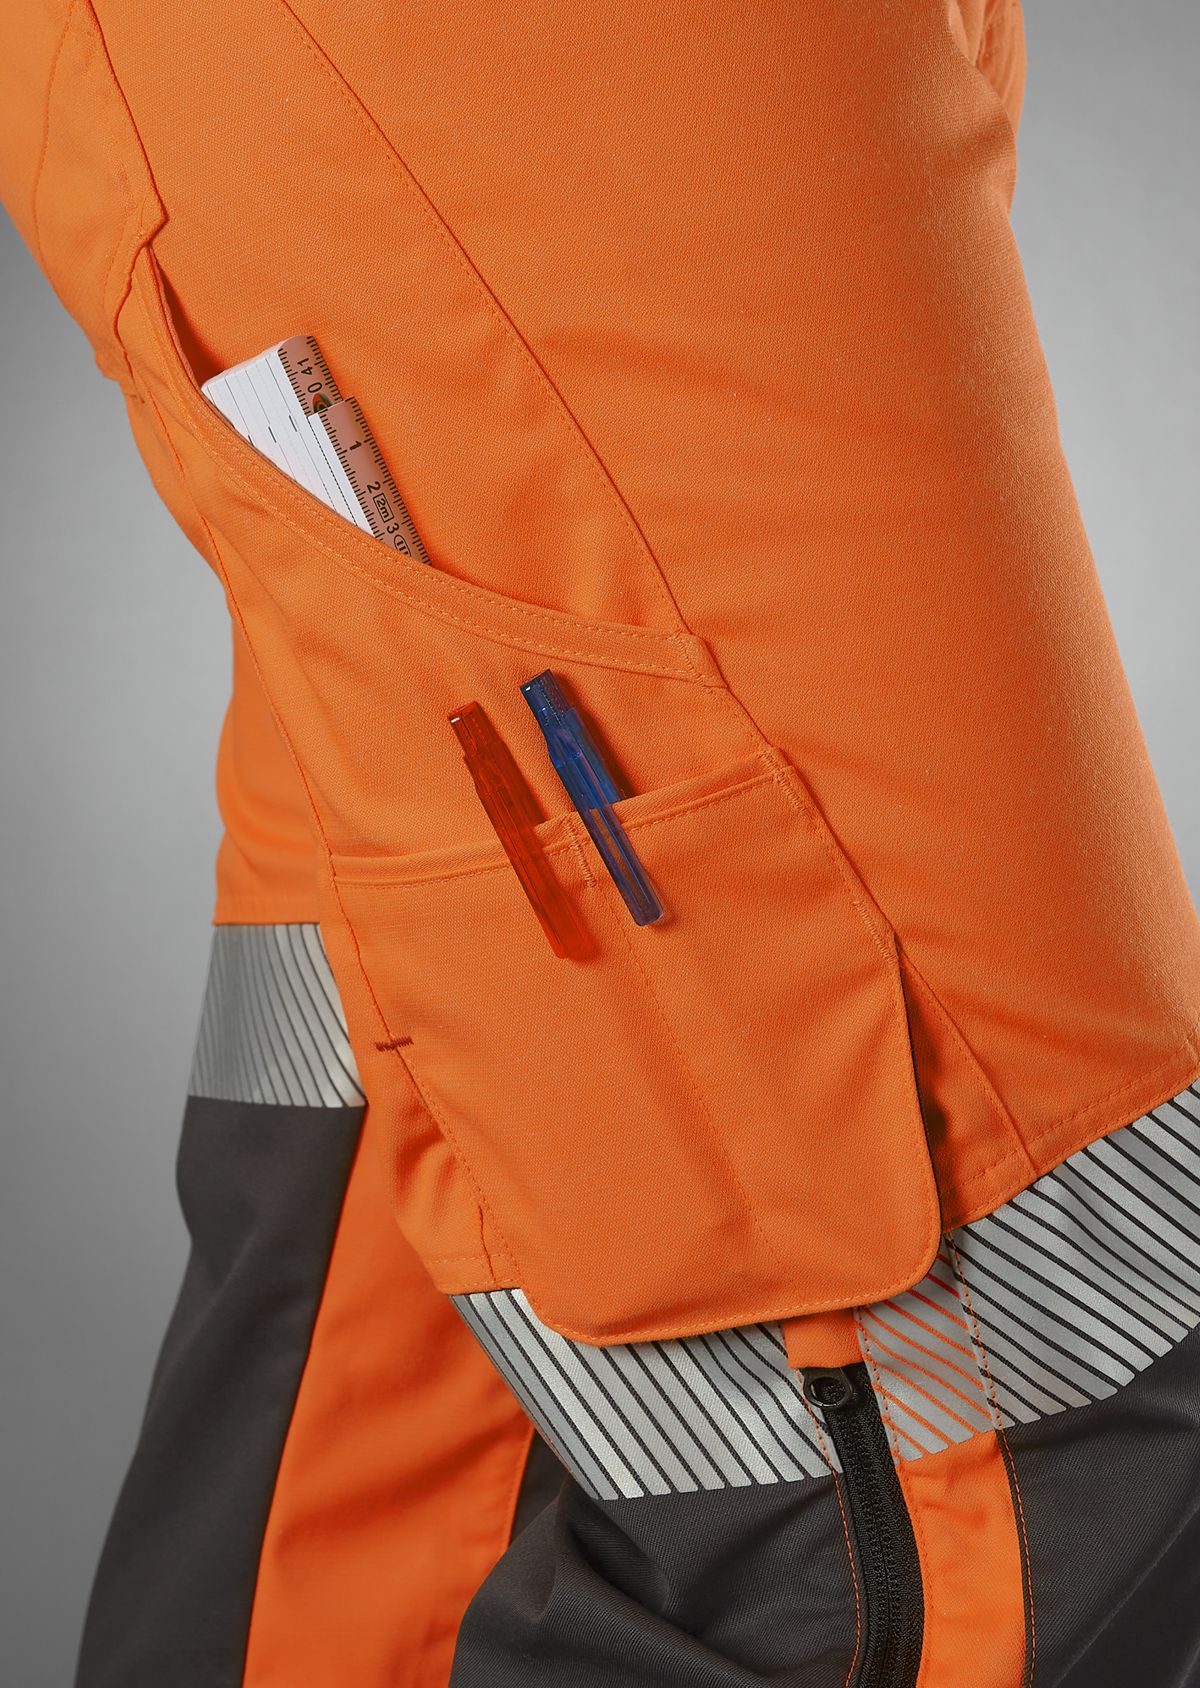 BP® High-visibility stretch trousers with knee pockets